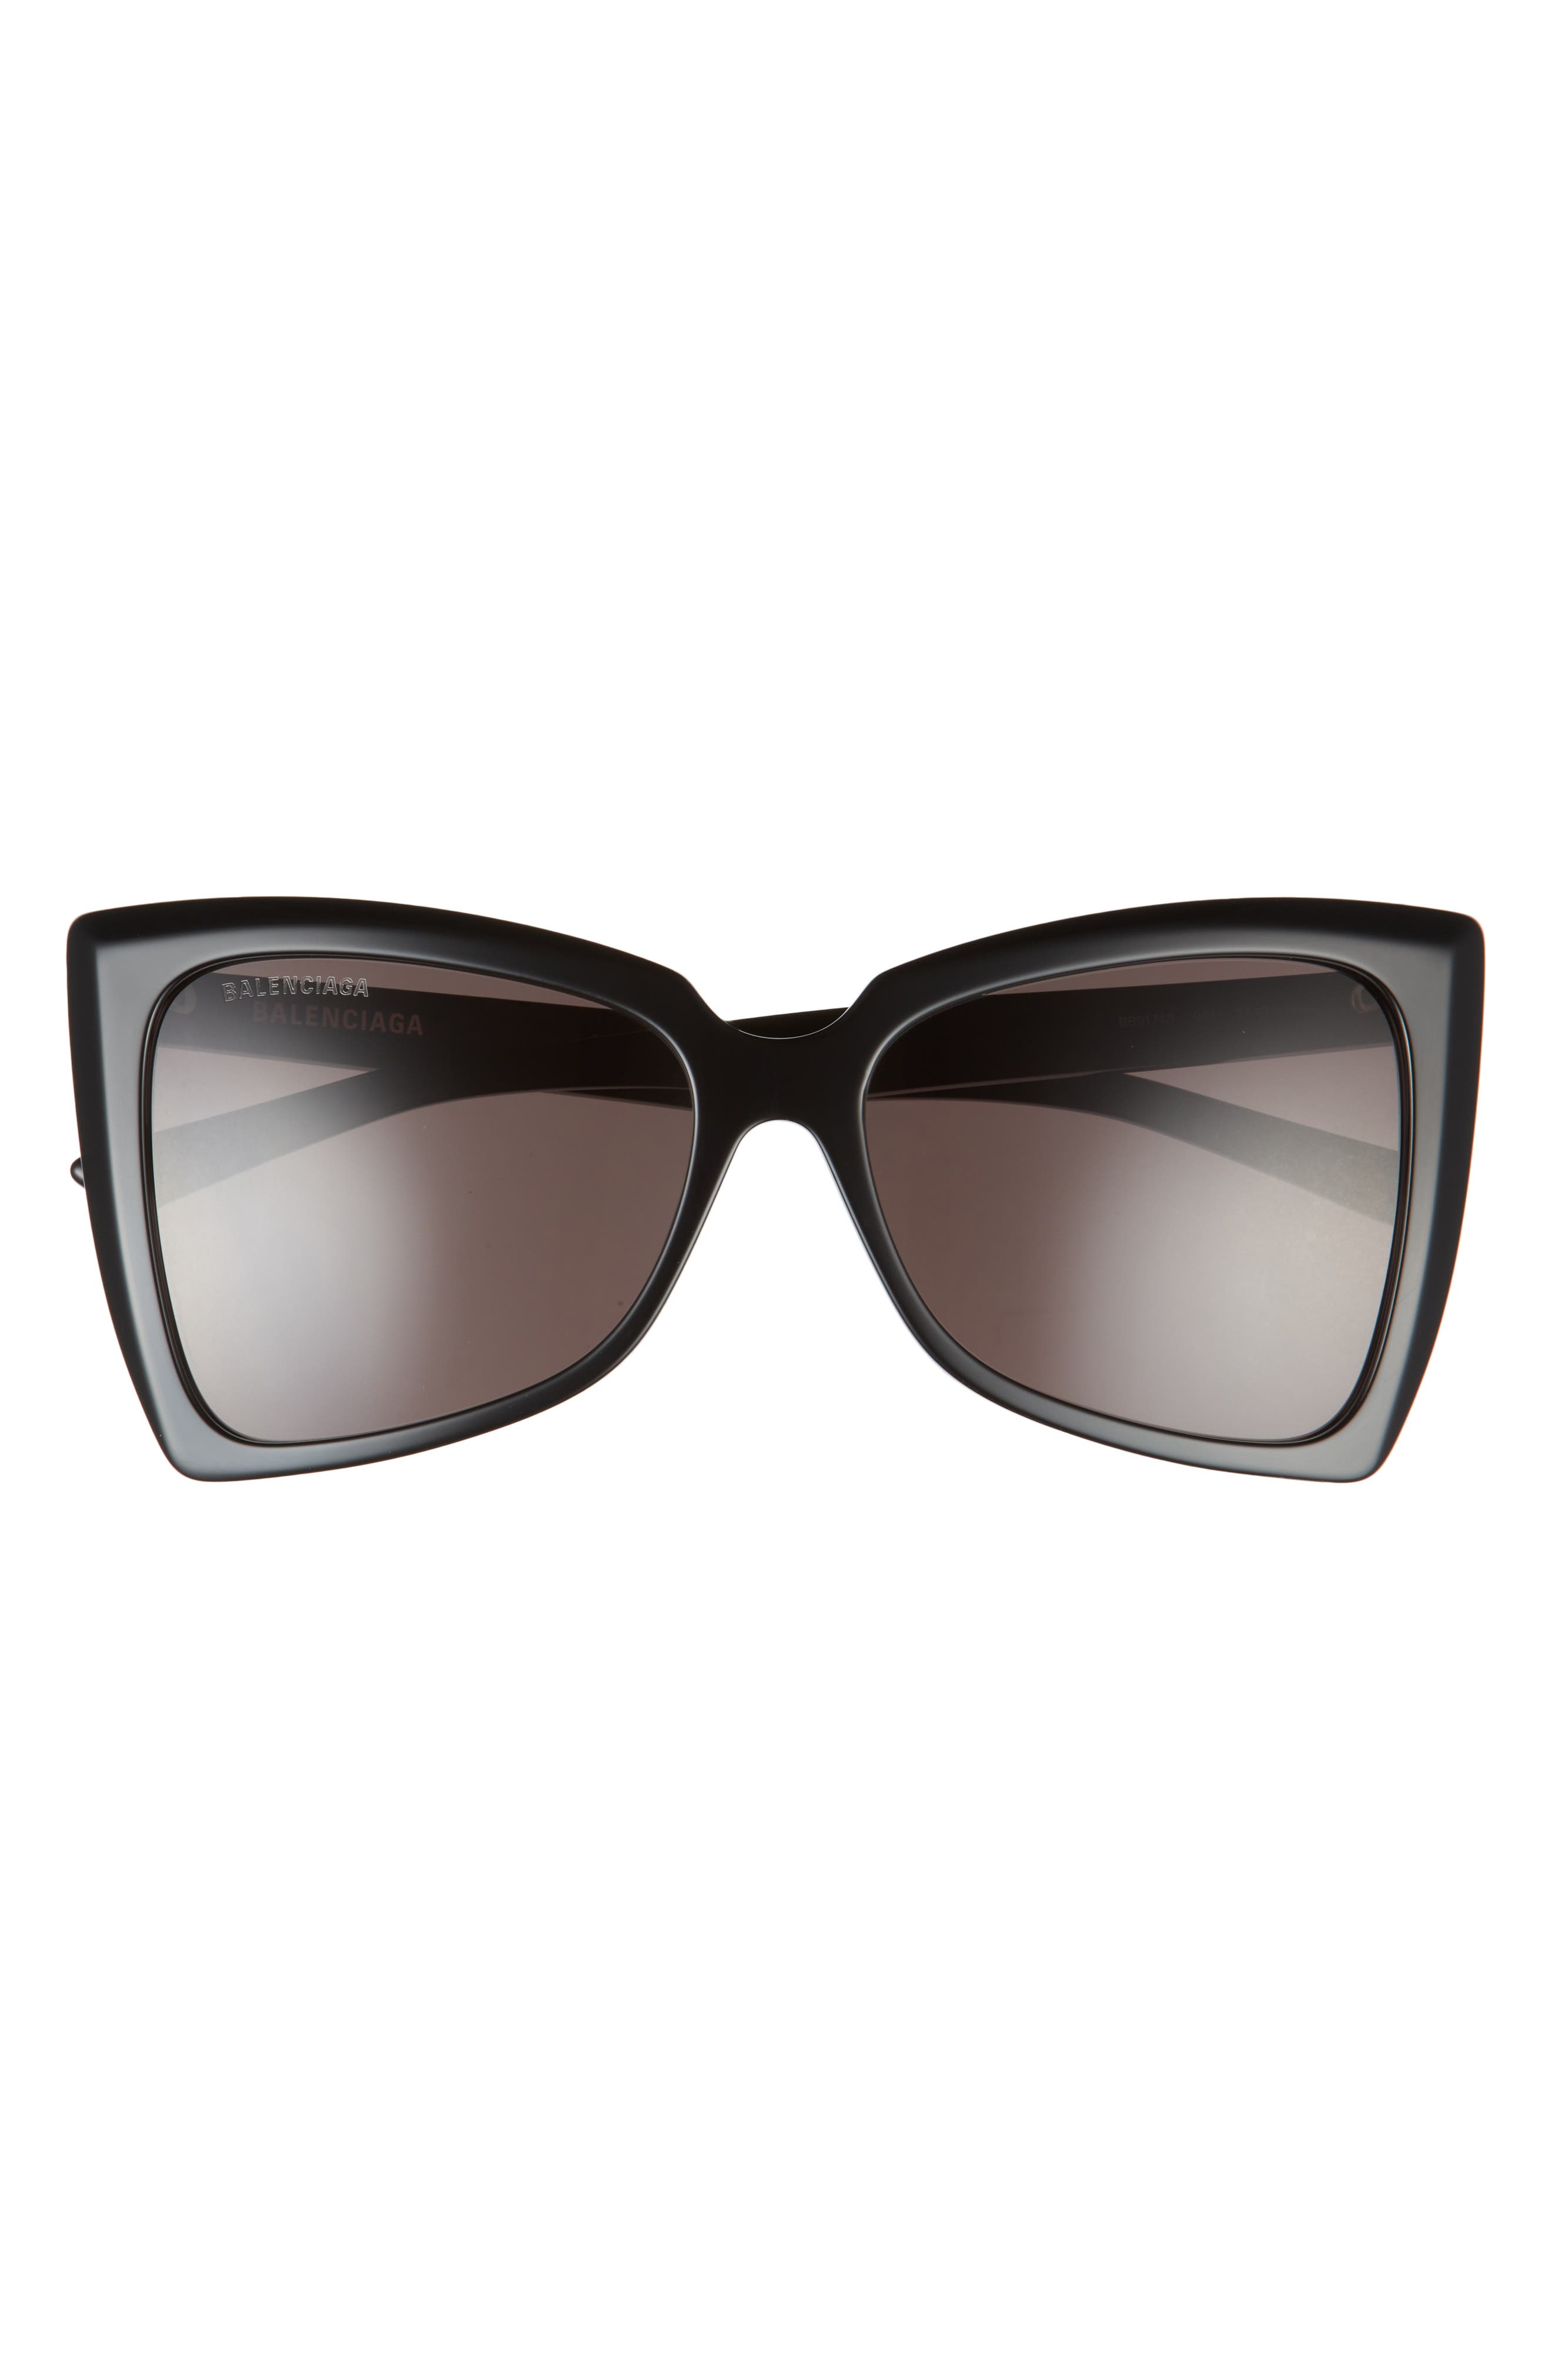 Balenciaga 57mm Butterfly Sunglasses in Black at Nordstrom